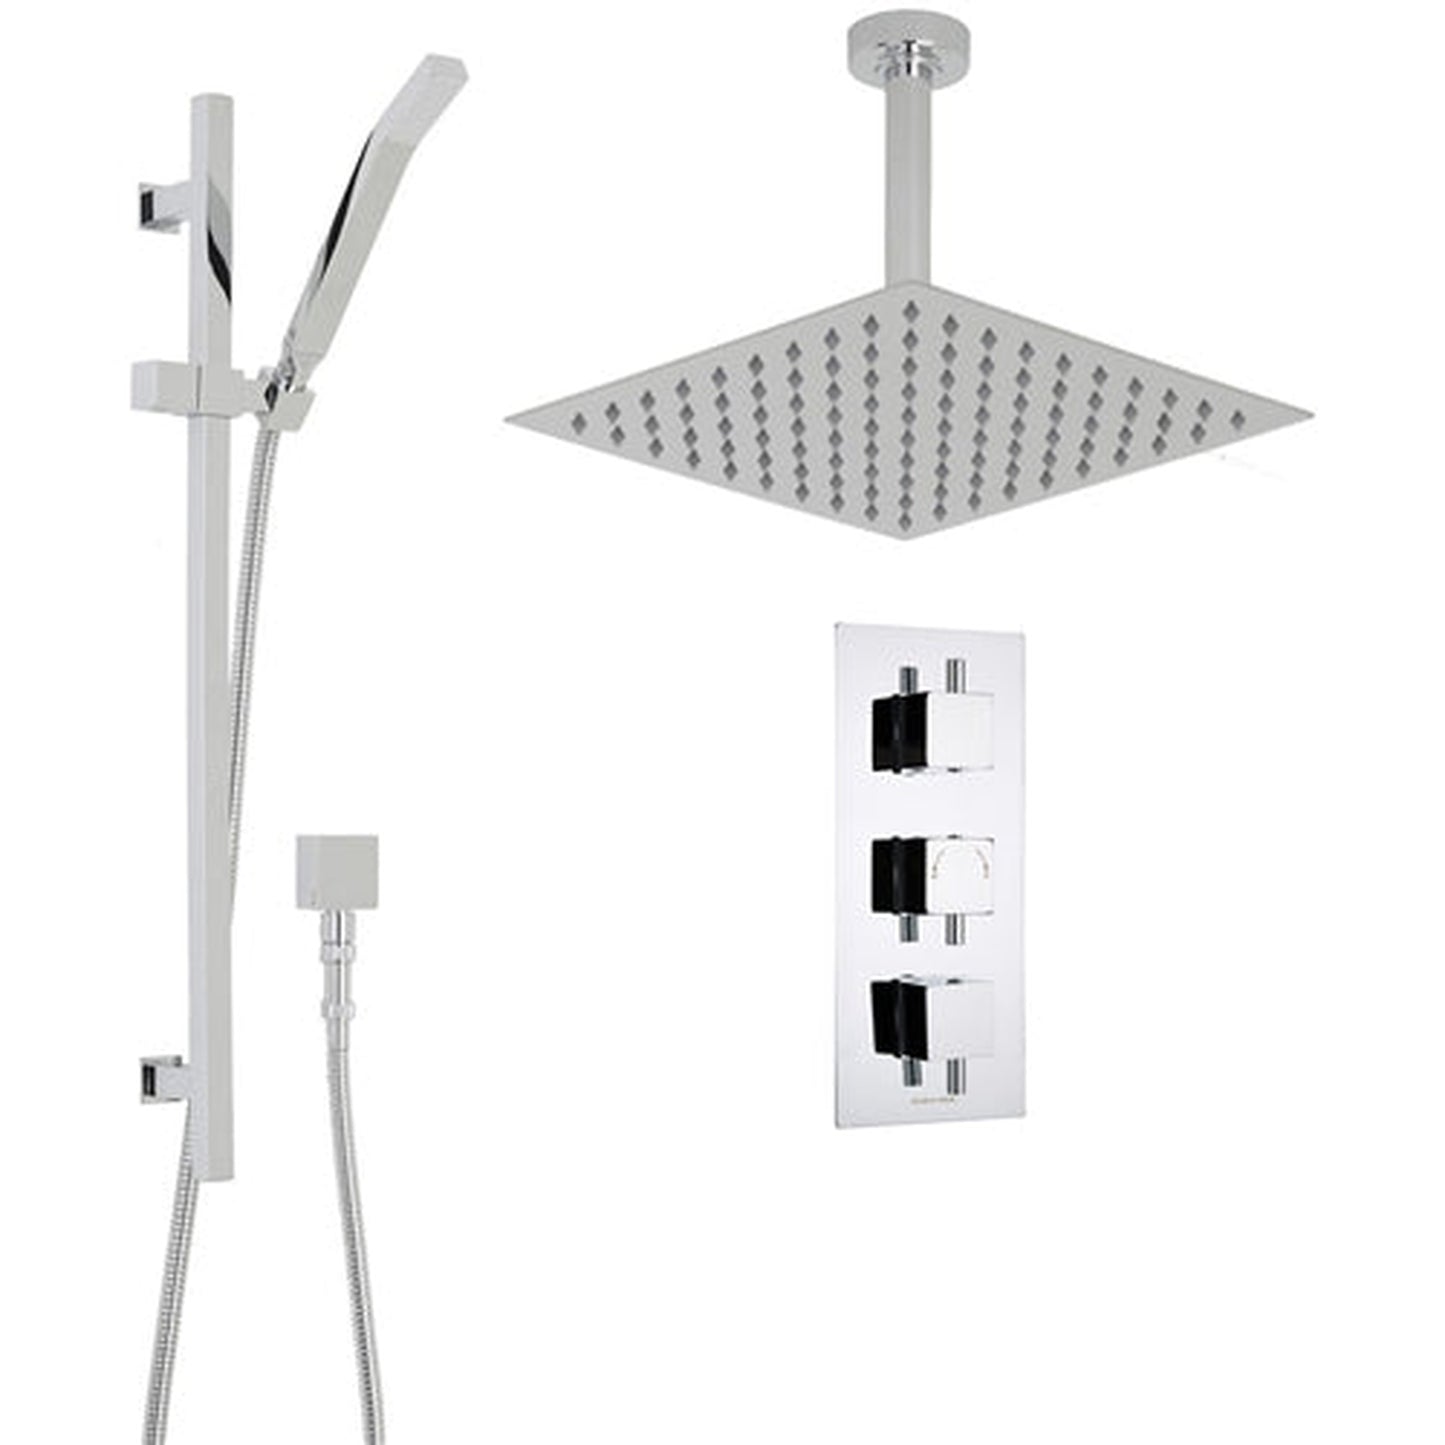 Fontana Liverpool 12" Chrome Round Ceiling Mounted Thermostatic Rainfall Shower System With Hand Shower and Without Water Powered LED Lights